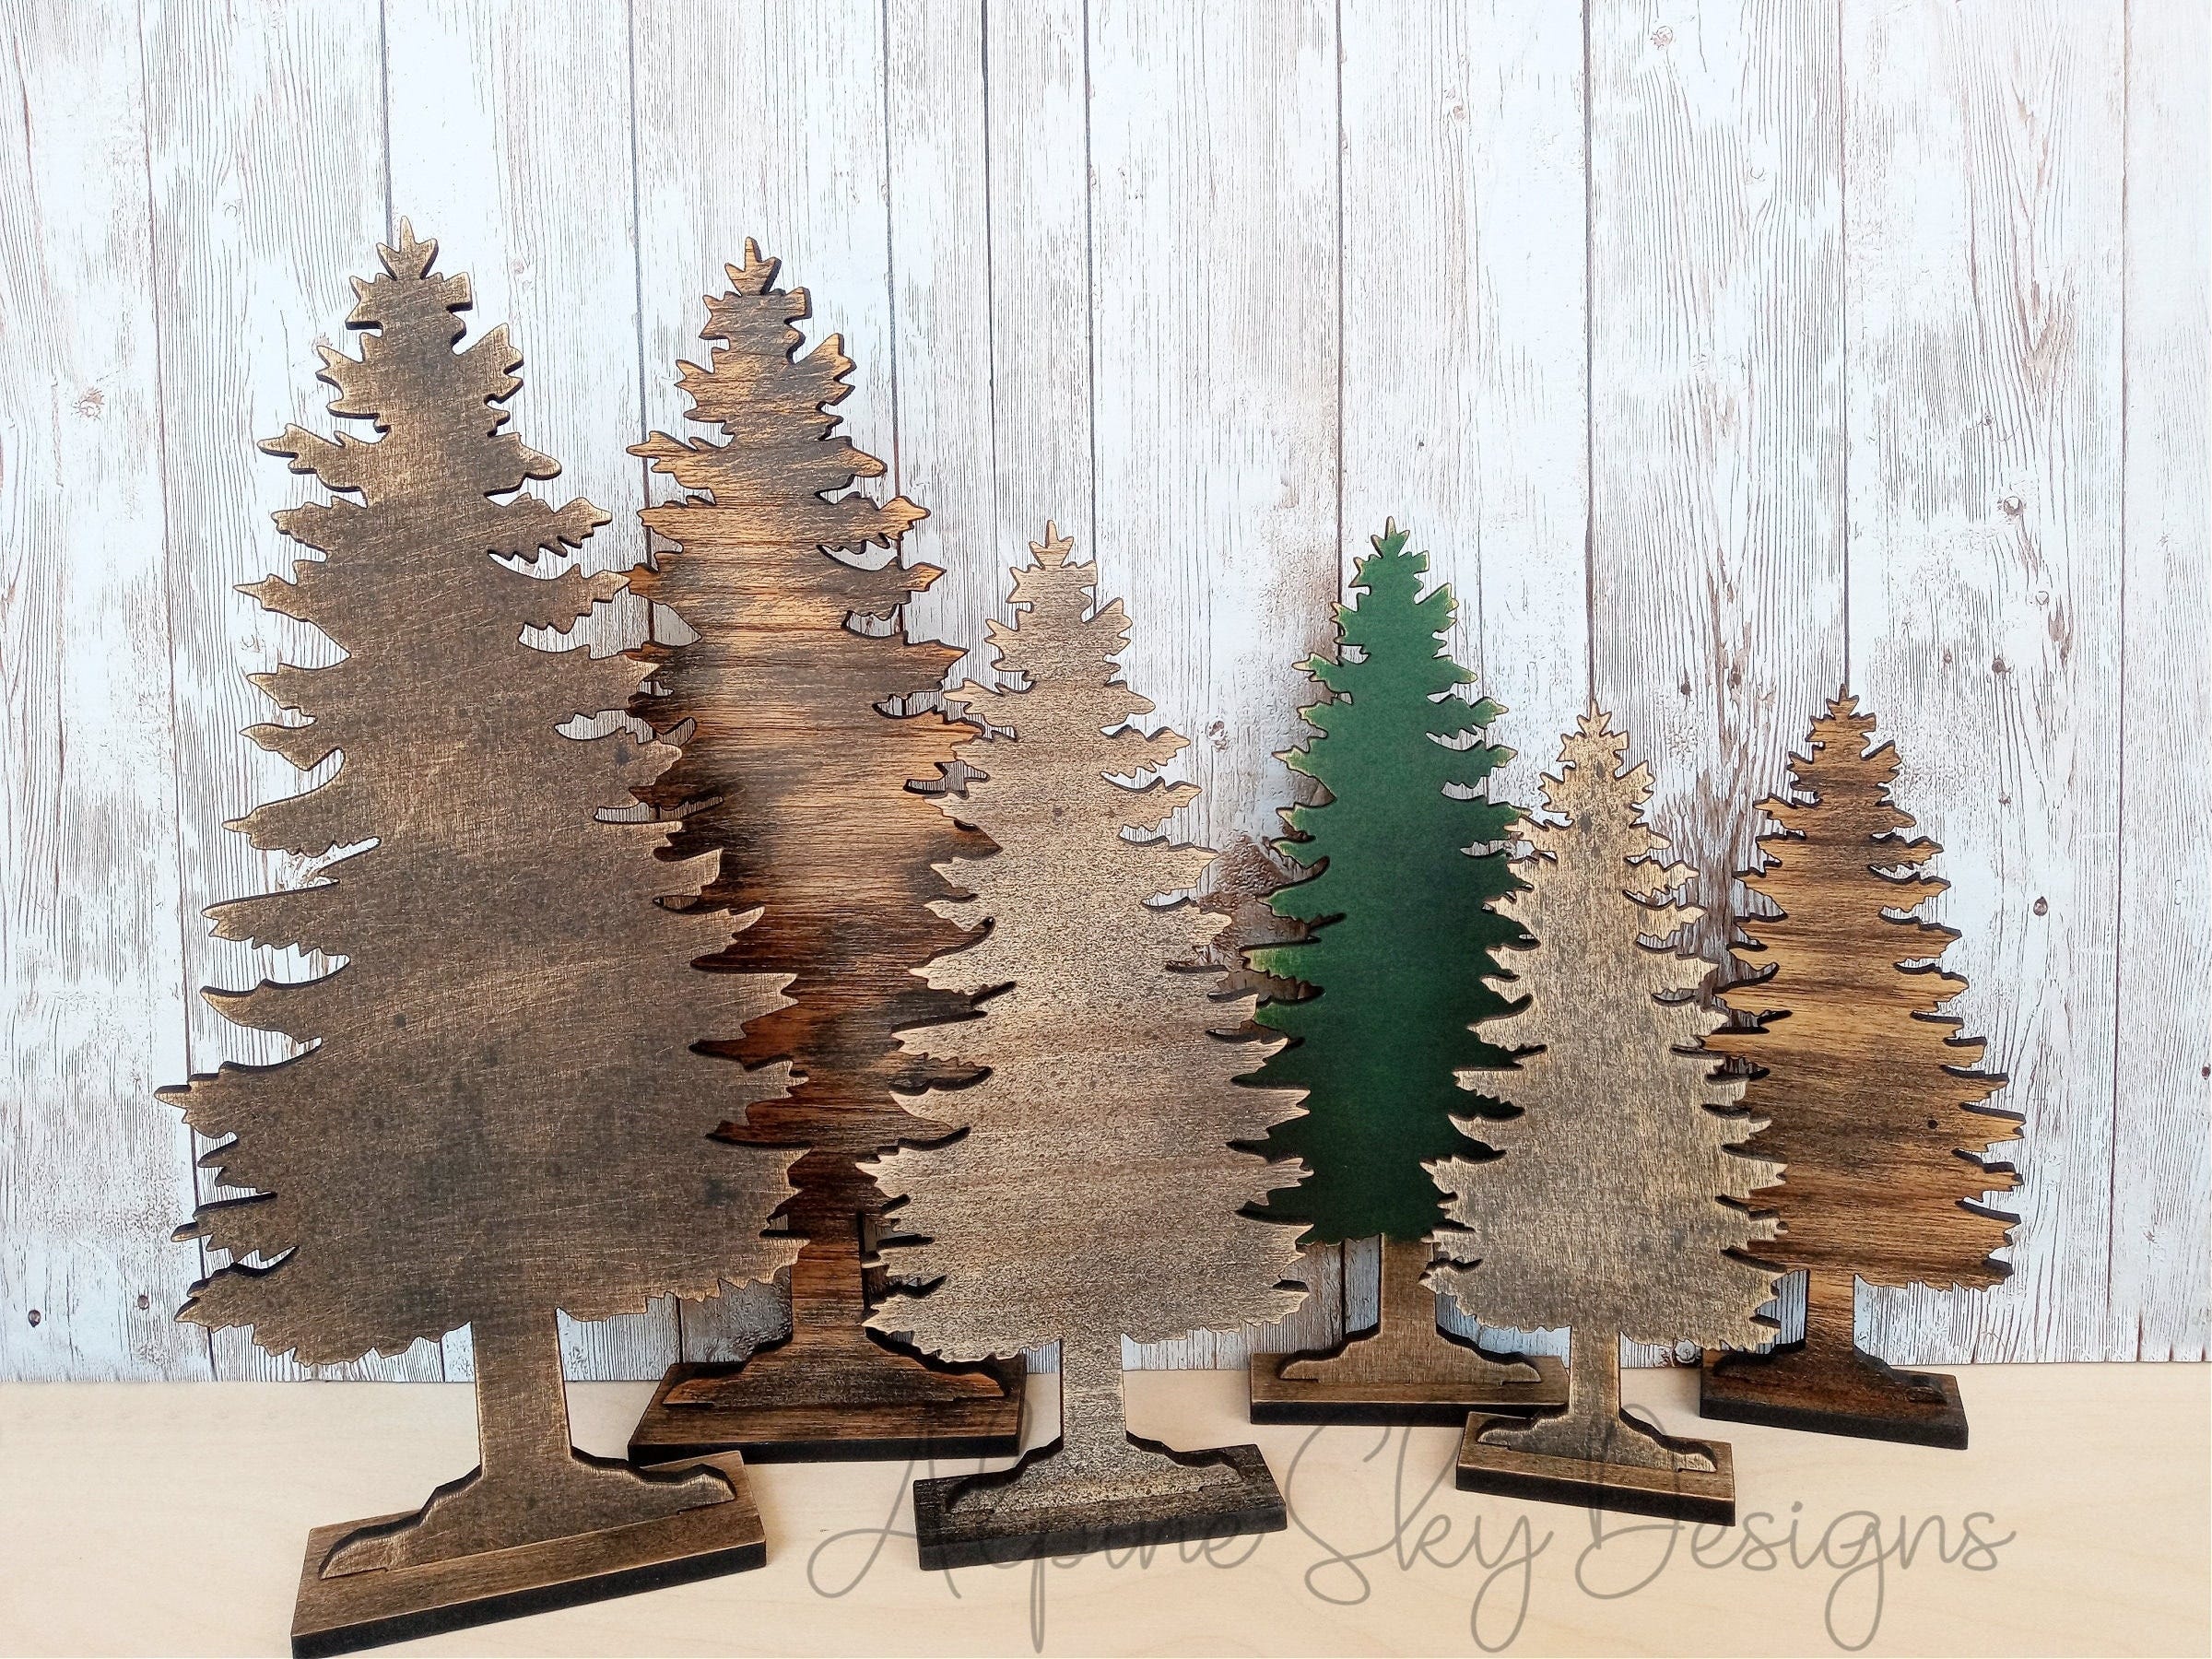 1/4 Standing Pine Tree SVG For Glowforge | Pine Tree SVG Laser | Evergreen Trees SVG | Glowforge Svg Files | Stand Alone Trees Svg Laser Cut